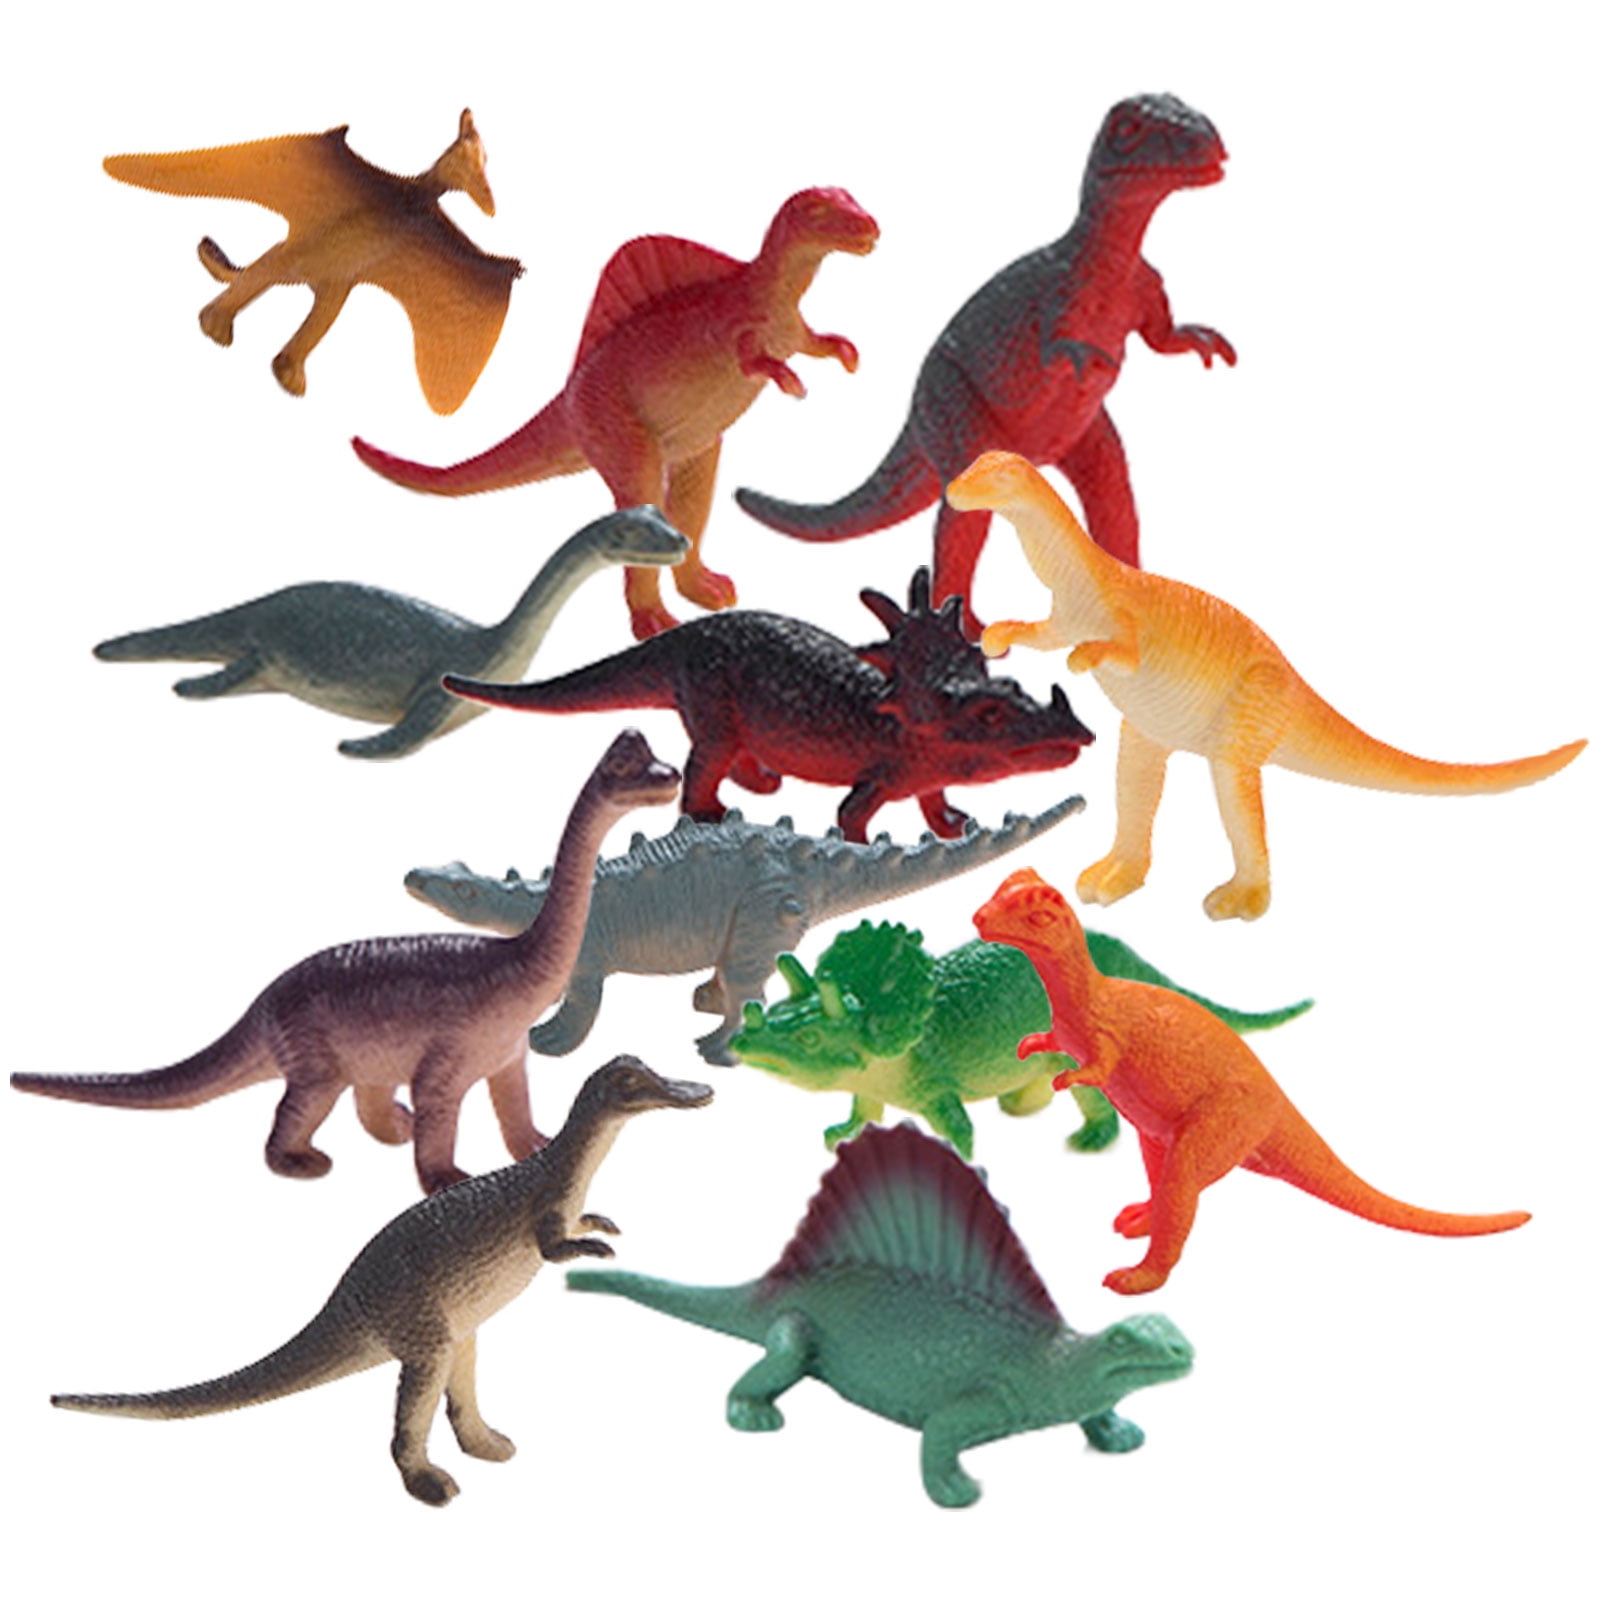 Mini Dinosaur Figure Toys 78 Pack Cute Size Plastic Durable for Kids Toddlers 